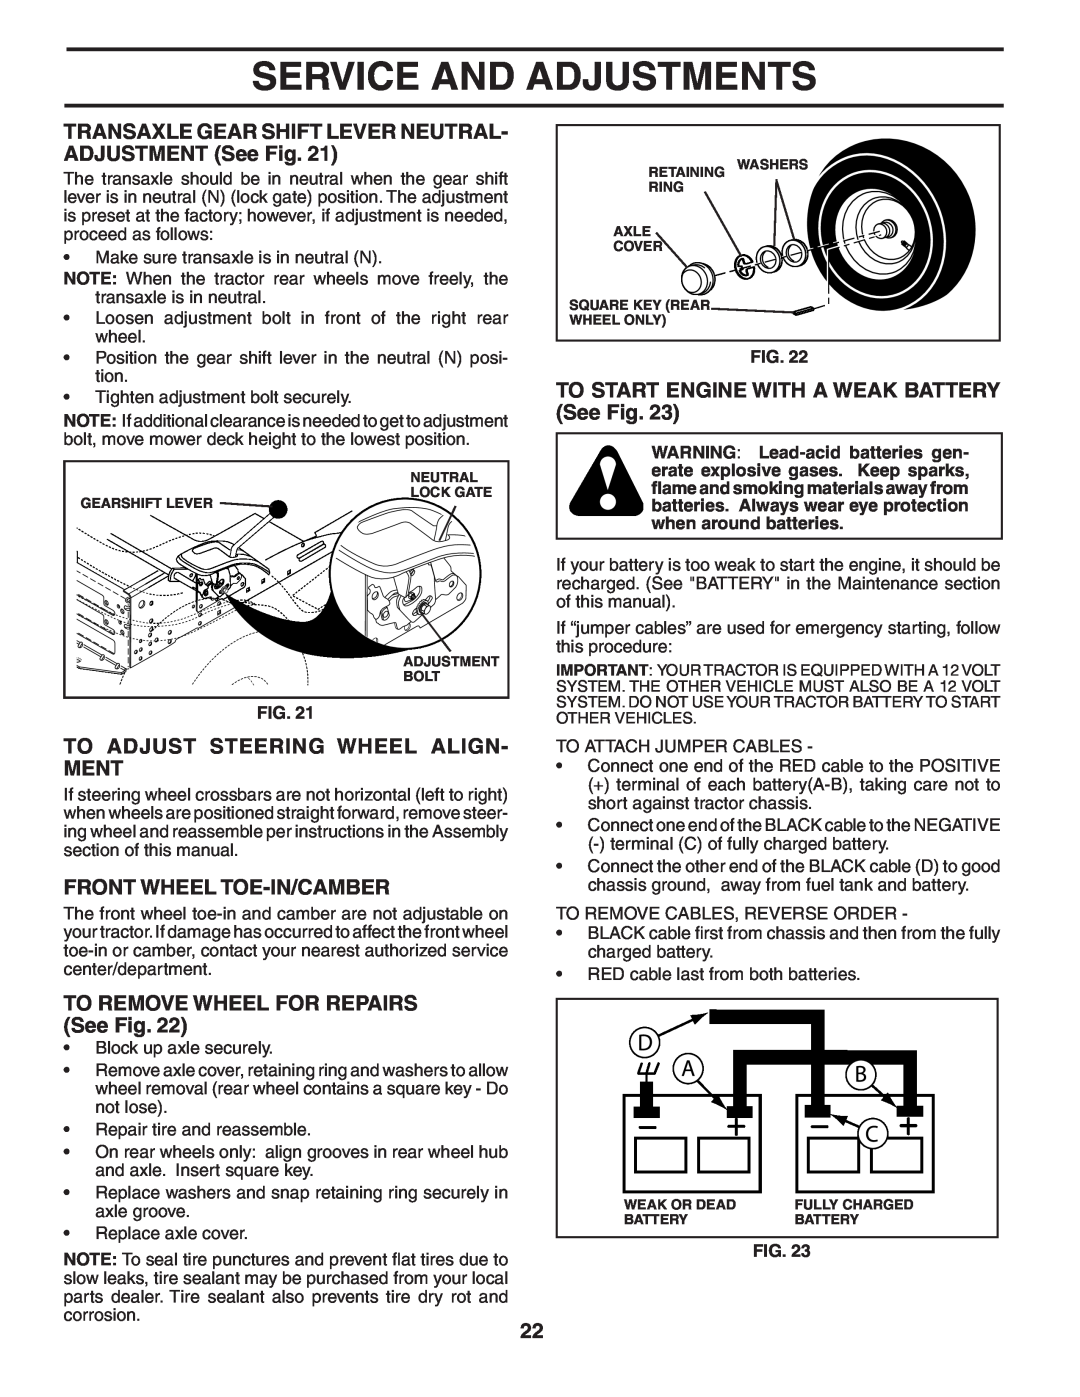 Weed Eater 60614 To Adjust Steering Wheel Align- Ment, Front Wheel Toe-In/Camber, TO REMOVE WHEEL FOR REPAIRS See Fig 